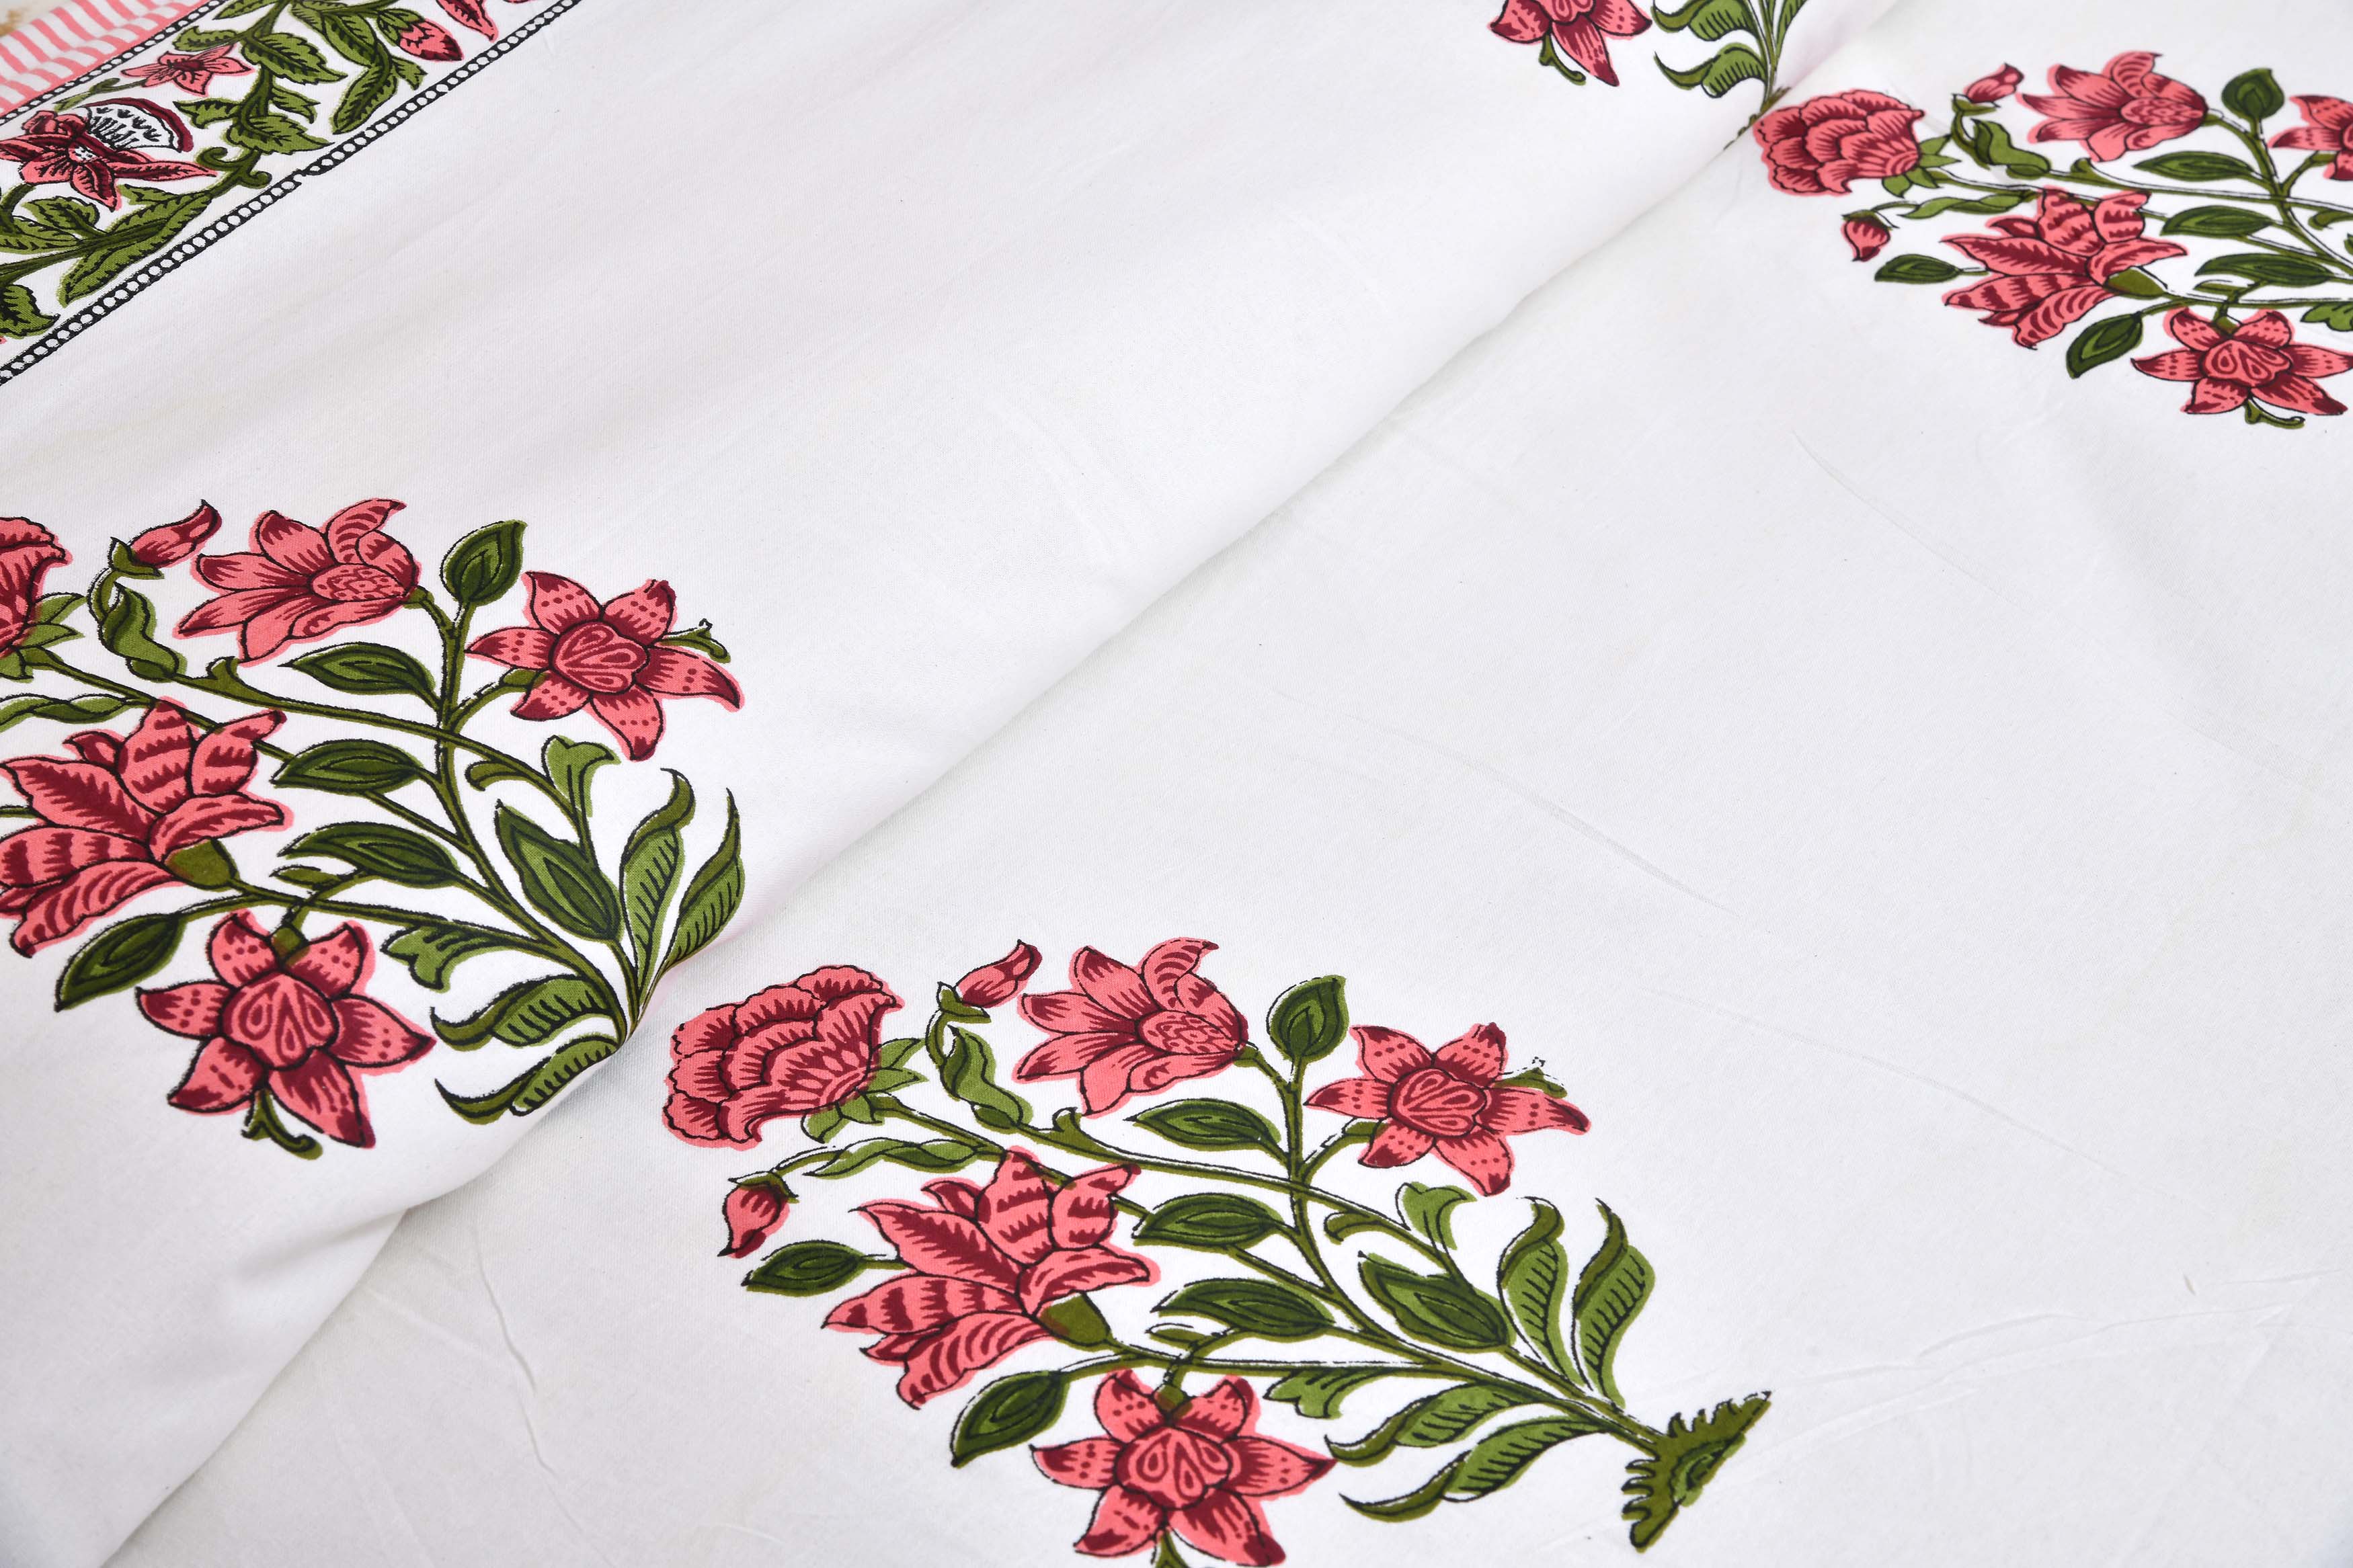 Pure Cotton Printed Bedsheet-Double Bed-Flower Tree-Pink